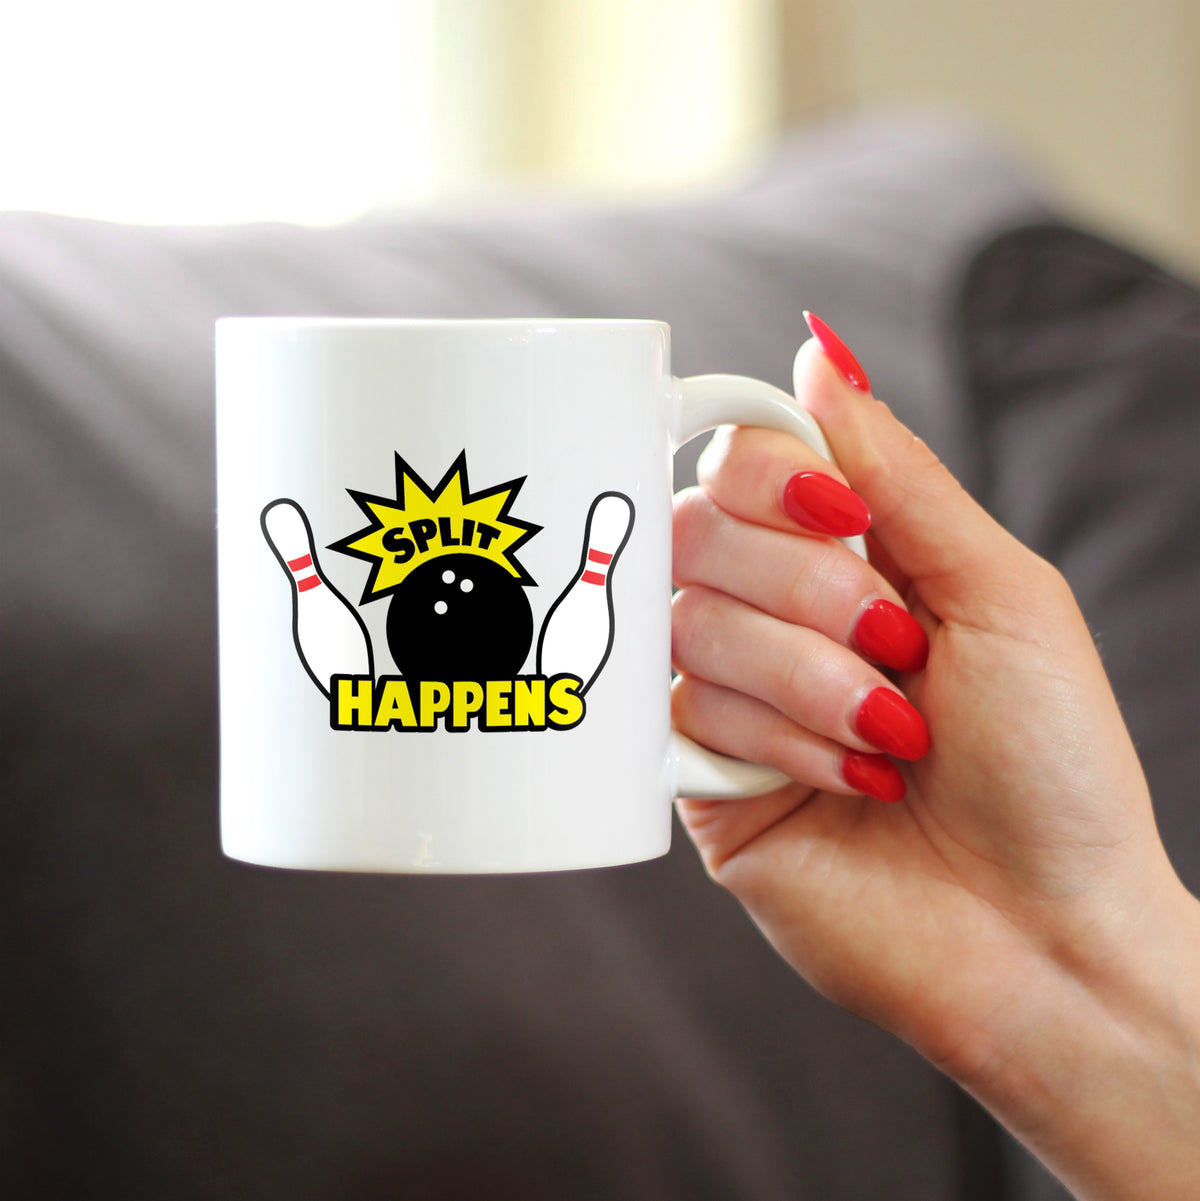 Split Happens - Bowling Coffee Mug - Funny Bowling Gifts and Decor for Bowlers